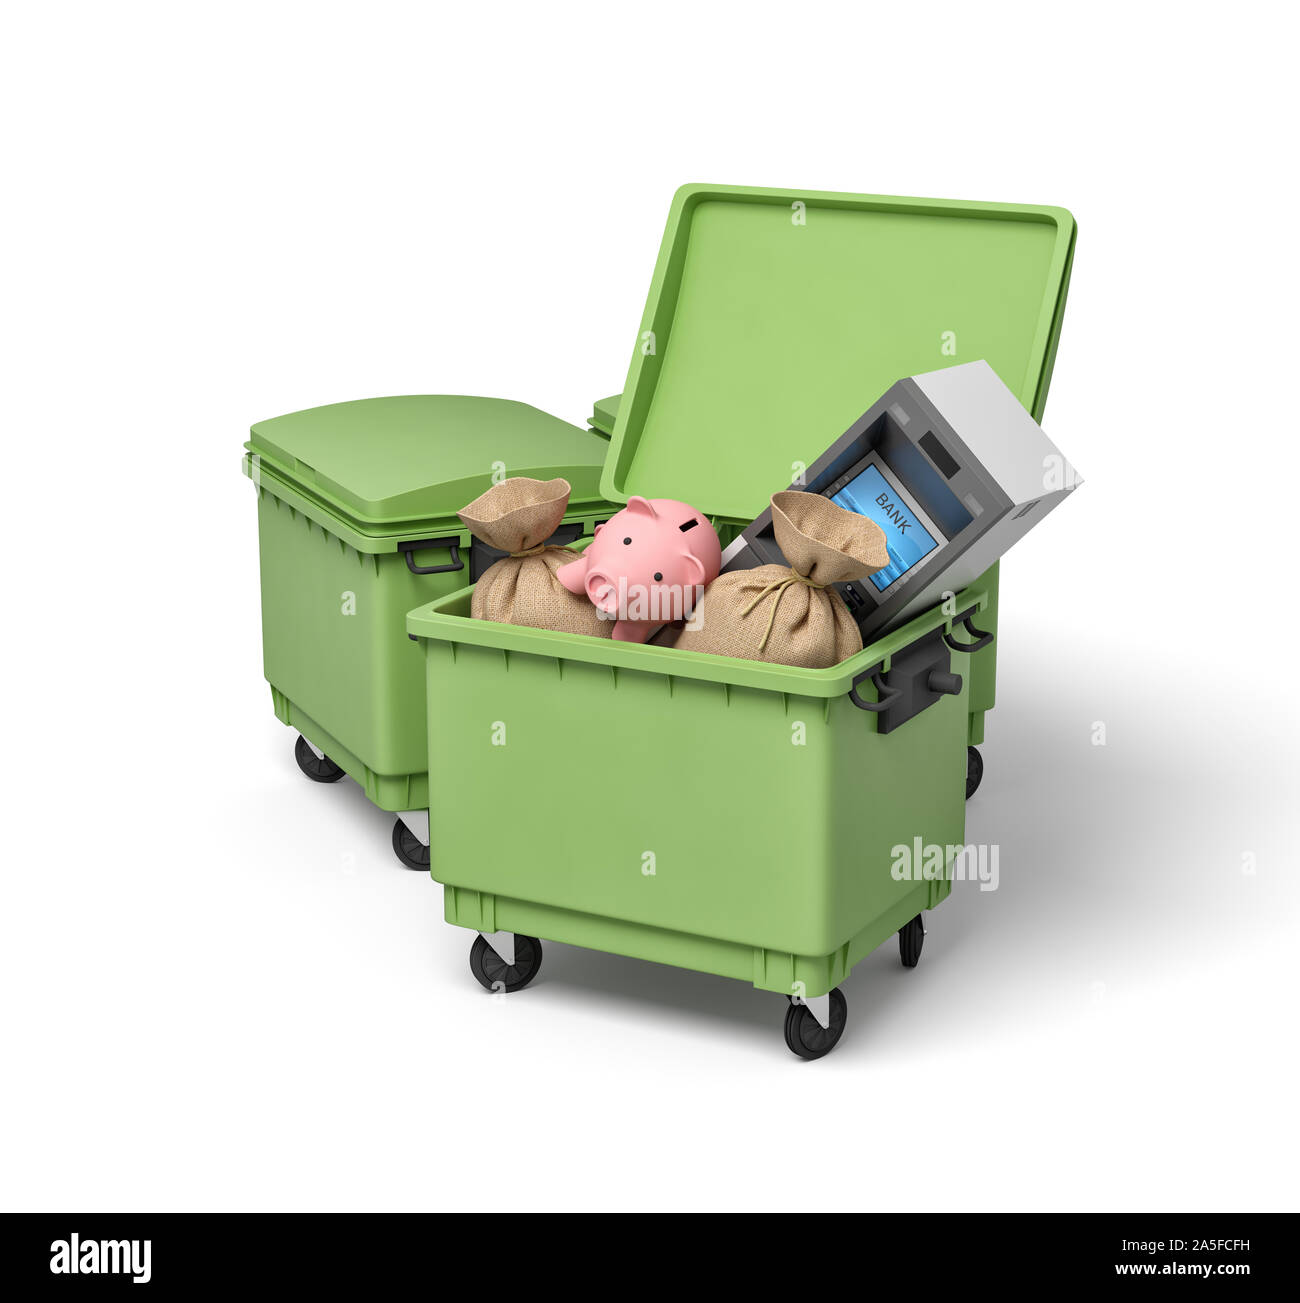 https://c8.alamy.com/comp/2A5FCFH/3d-rendering-of-green-trash-bins-with-pink-piggy-bank-atm-machine-and-money-bags-inside-2A5FCFH.jpg